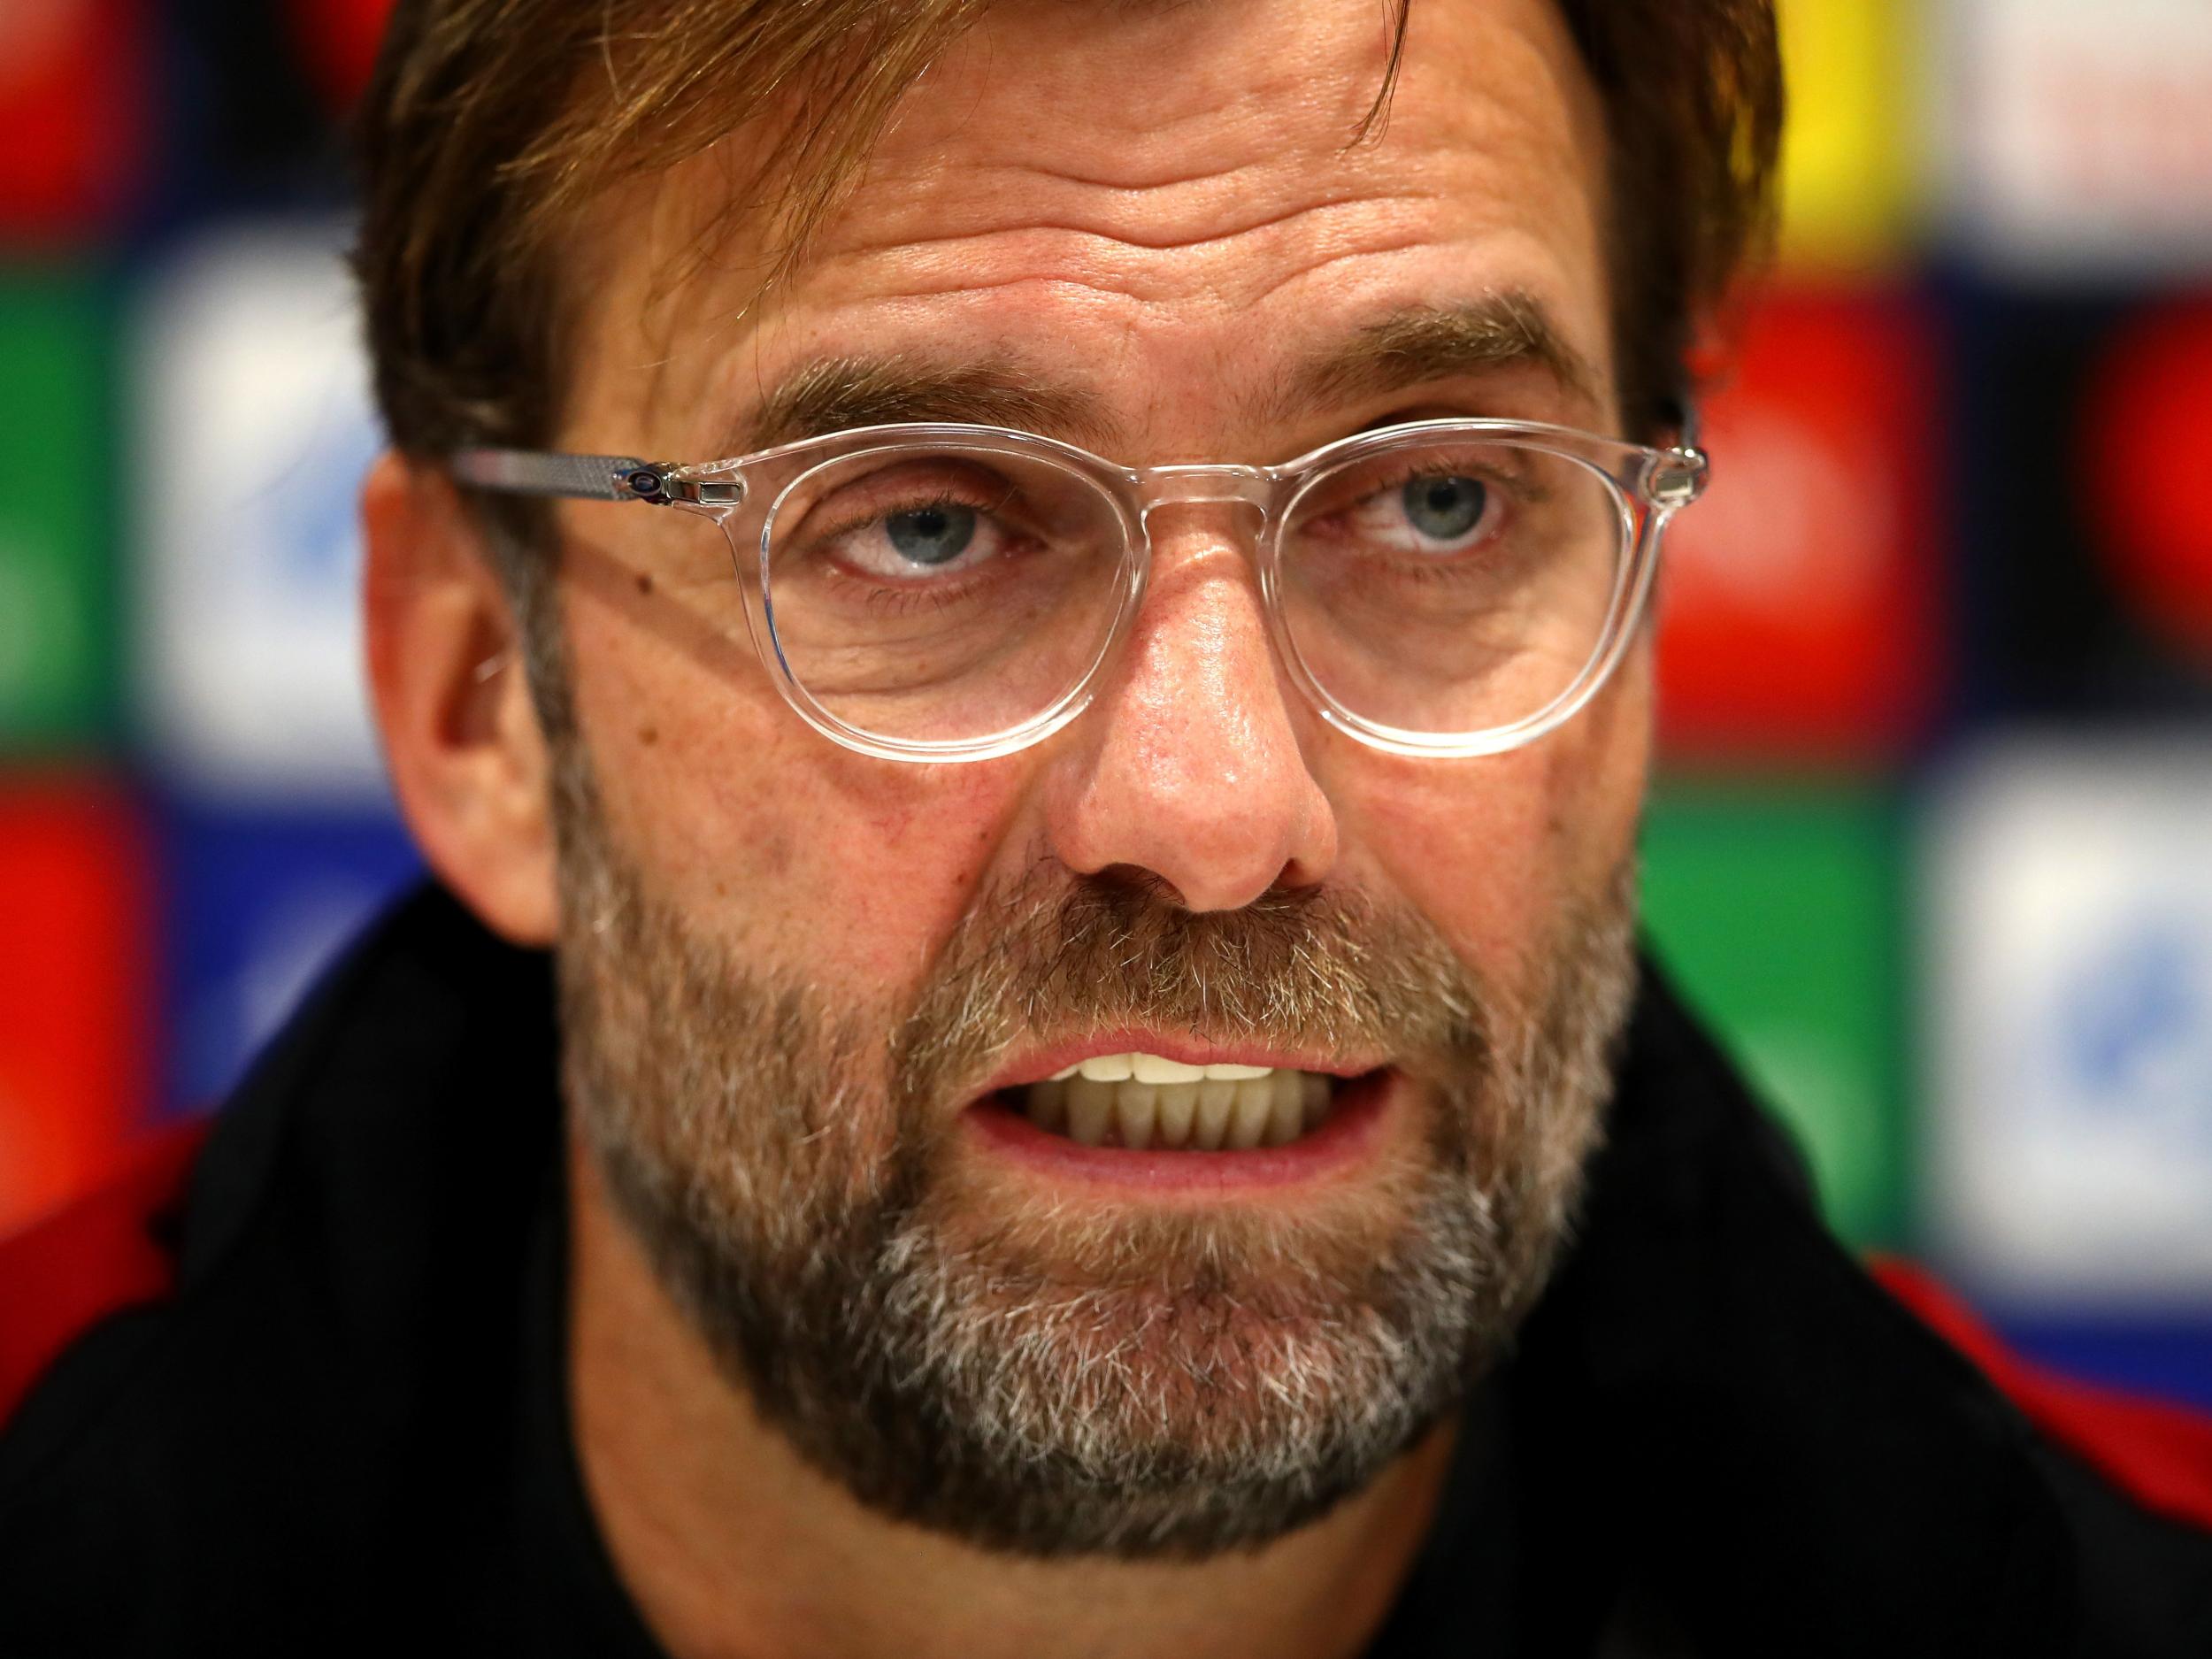 Jurgen Klopp believes if 'something special is possible', it can happen at Anfield